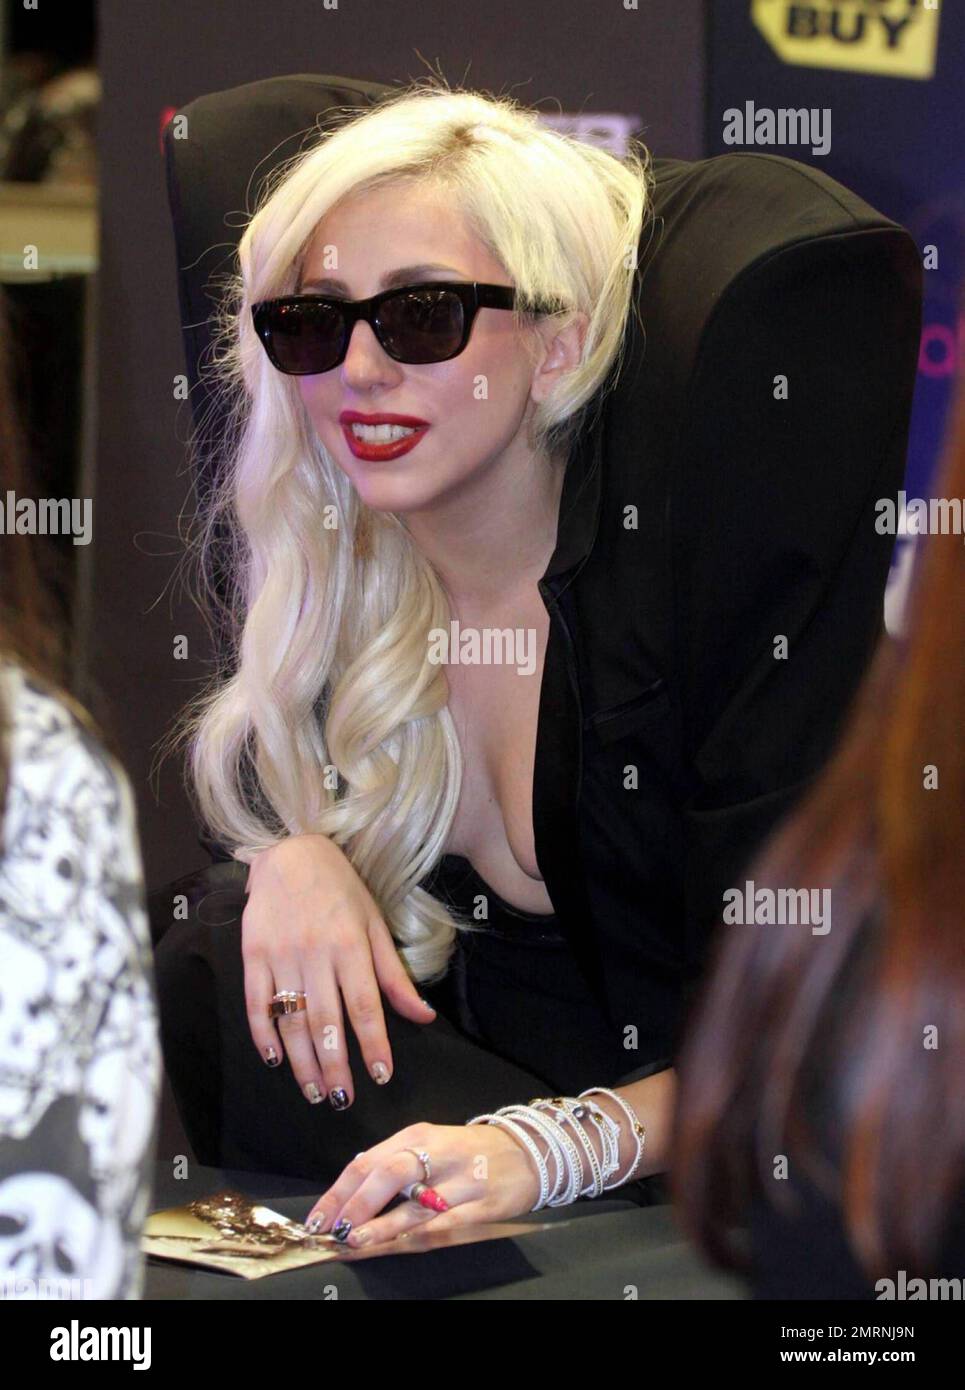 - Lady Gaga meets her fans at electronics store Best Buy in Los Angeles. The singer, real name Stefani Joanne Angelina Germanotta, was at the store to sign copies of her latest album entitled 'The Fame Monster.' Los Angeles, CA. 11/23/09. Stock Photo